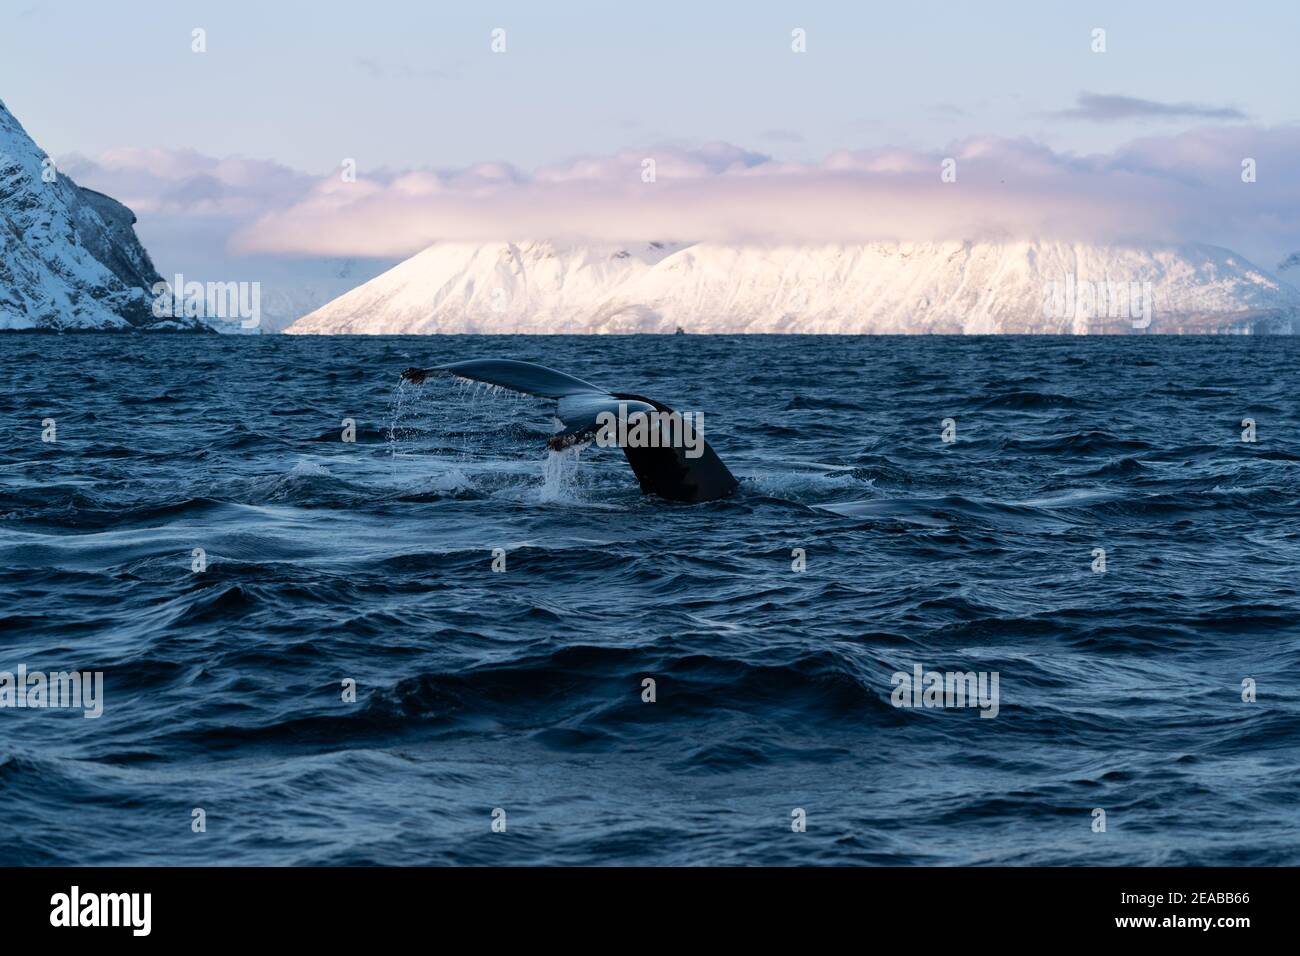 Norway, Nord-Norge, Skjervoy, Winter, Sea, Sky, Sunset, Clouds, Humpback, Megaptera novaeangliae, Tour, Fin, Mountain, Fjord Stock Photo